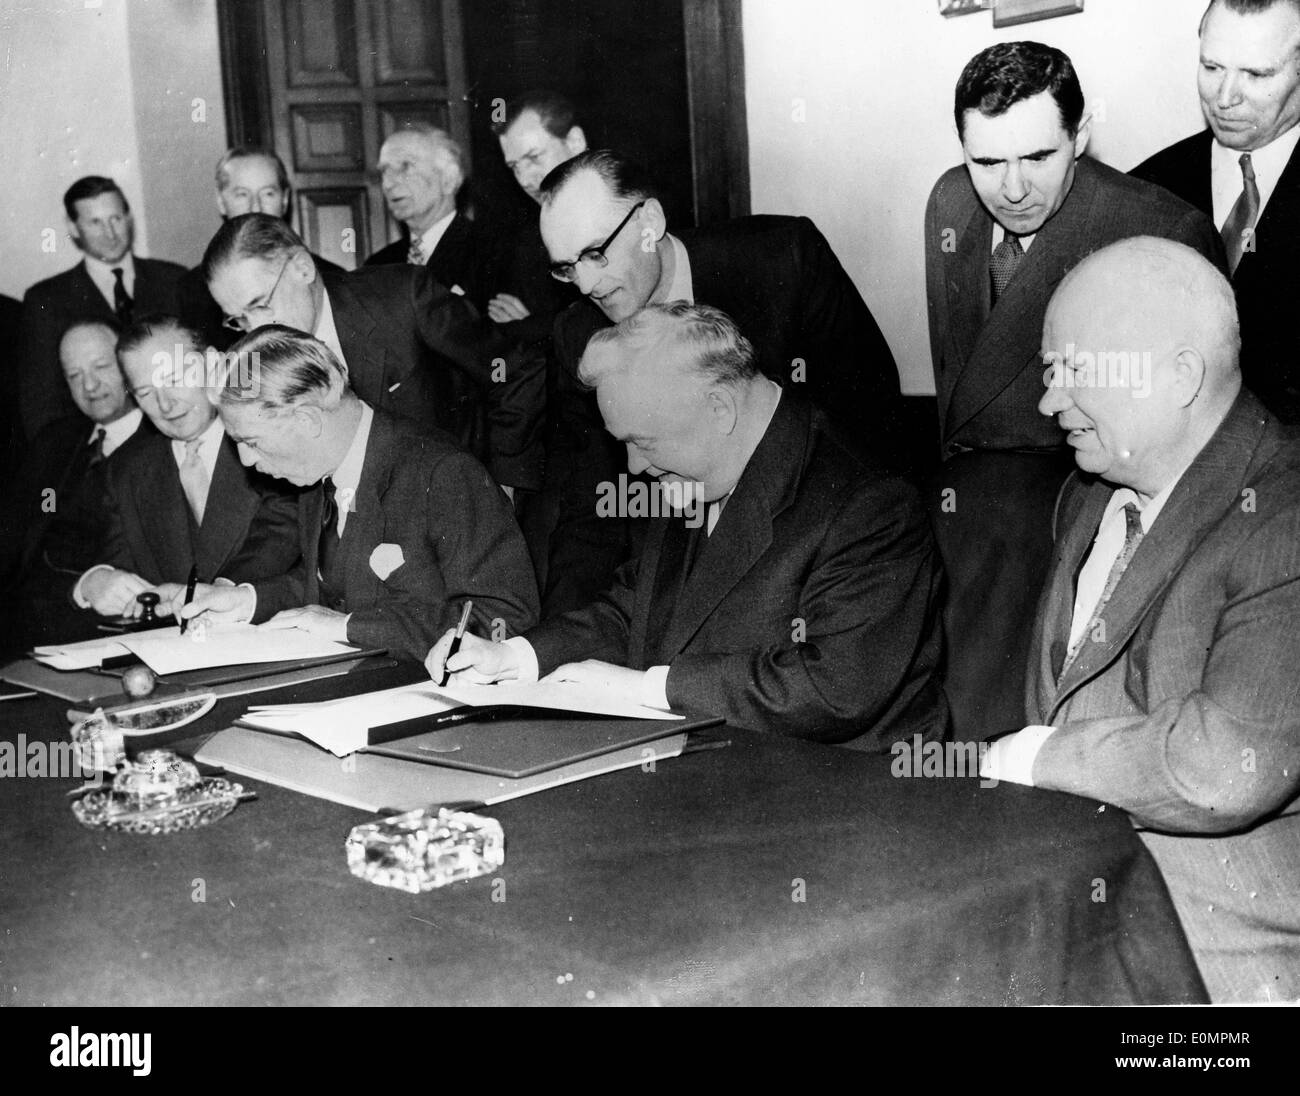 Prime Minister Nikita Khrushchev and others signing documents Stock Photo